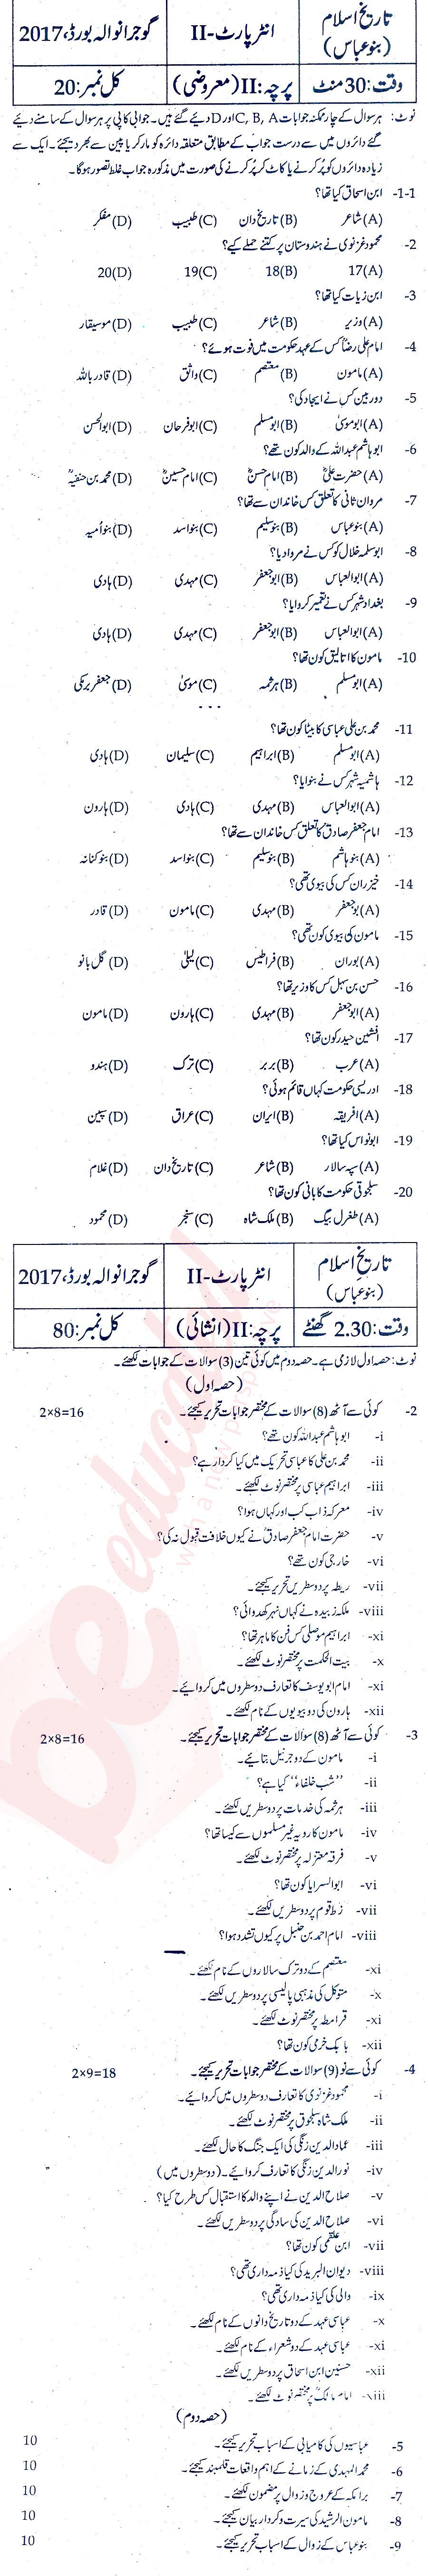 Islamic History FA Part 2 Past Paper Group 1 BISE Gujranwala 2017